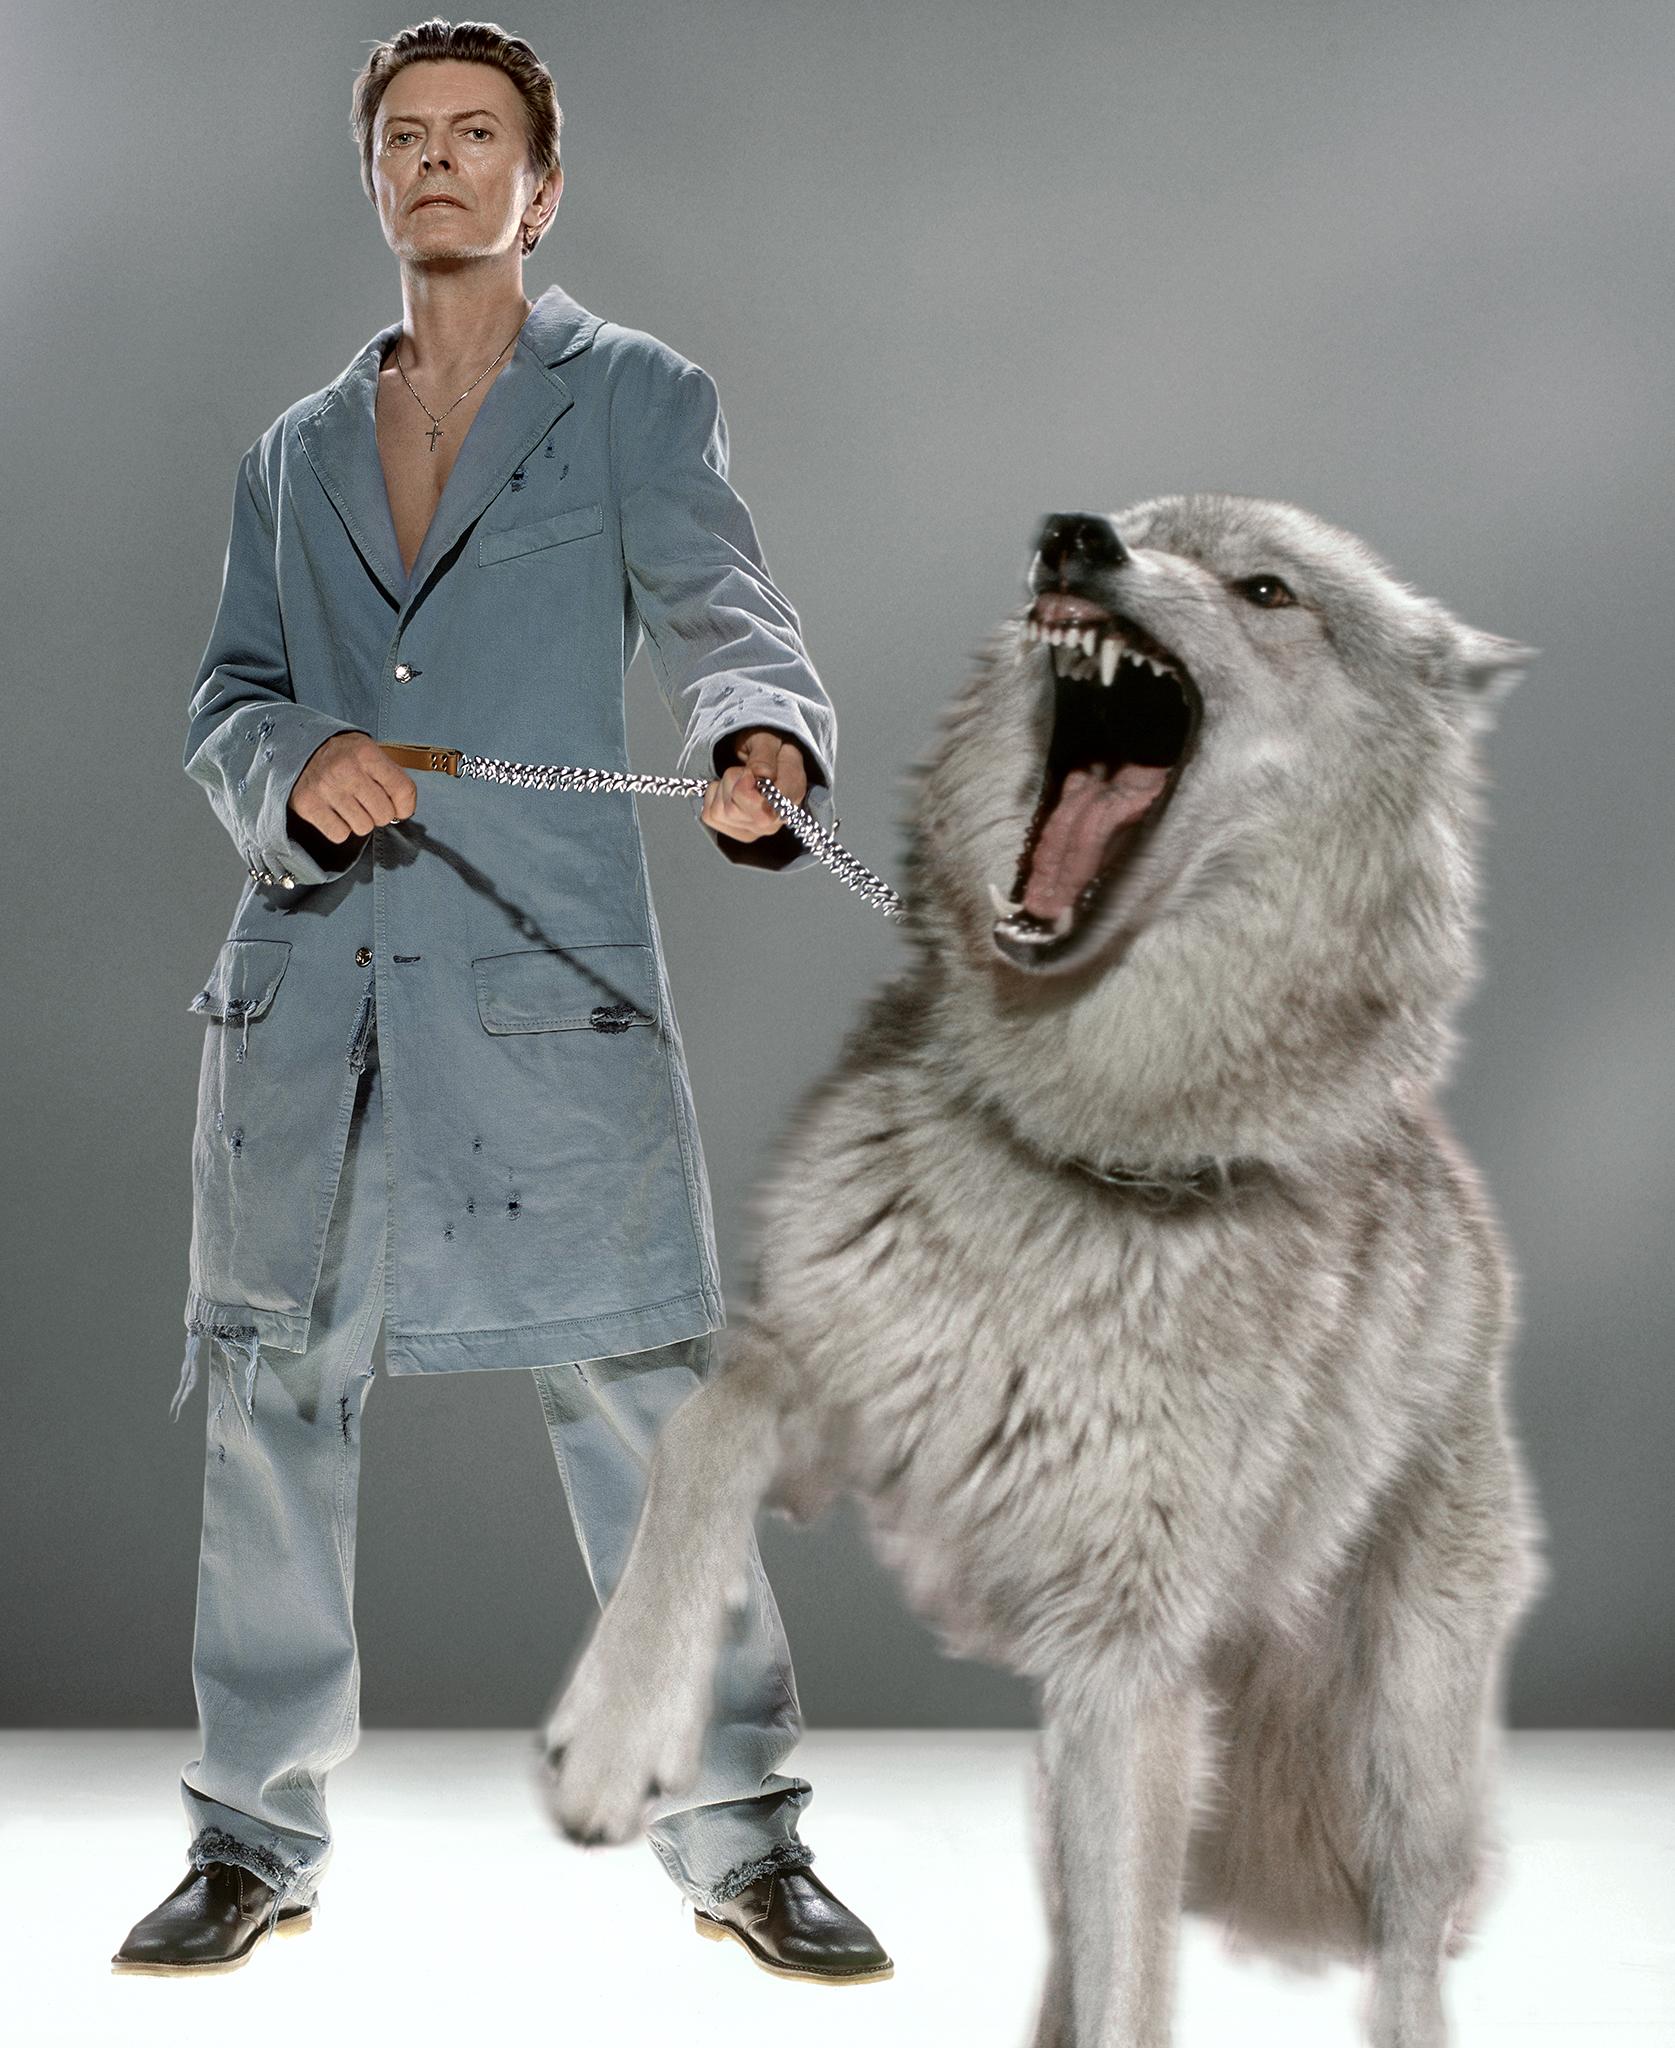 Markus Klinko Figurative Photograph - The Protector - superstar David Bowie in blue with roaring wolf